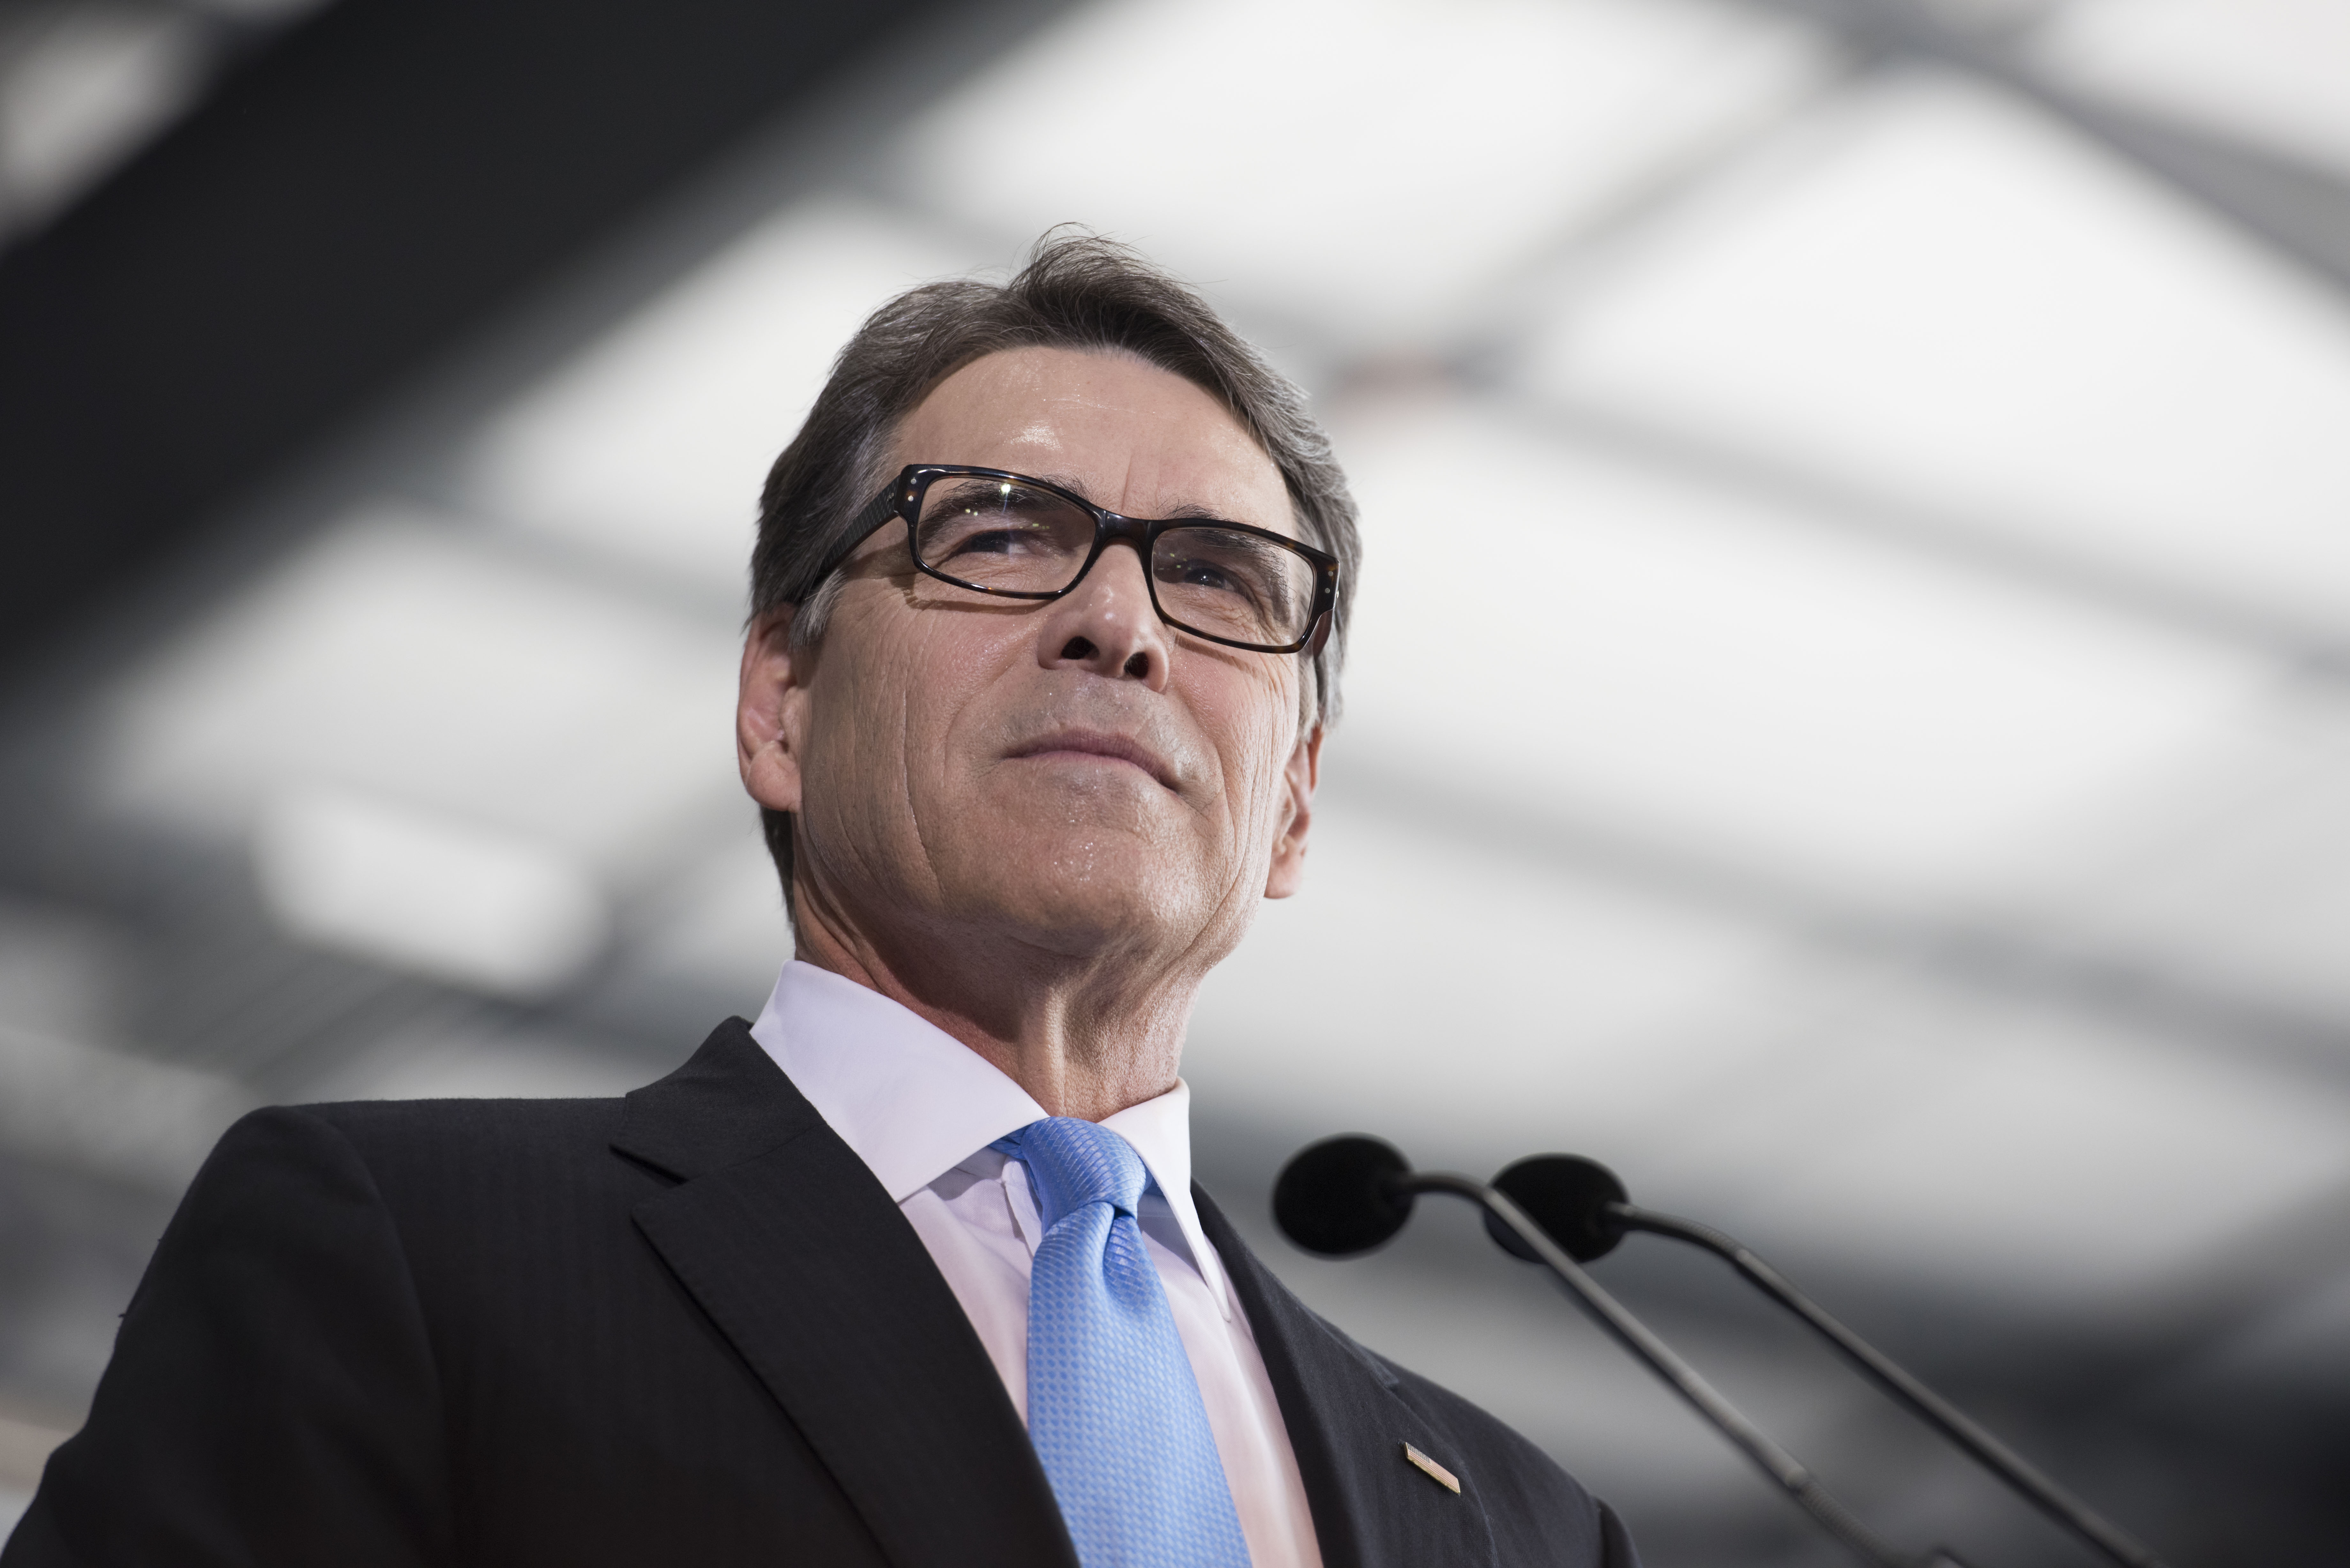 Rick Perry, former governor of Texas.